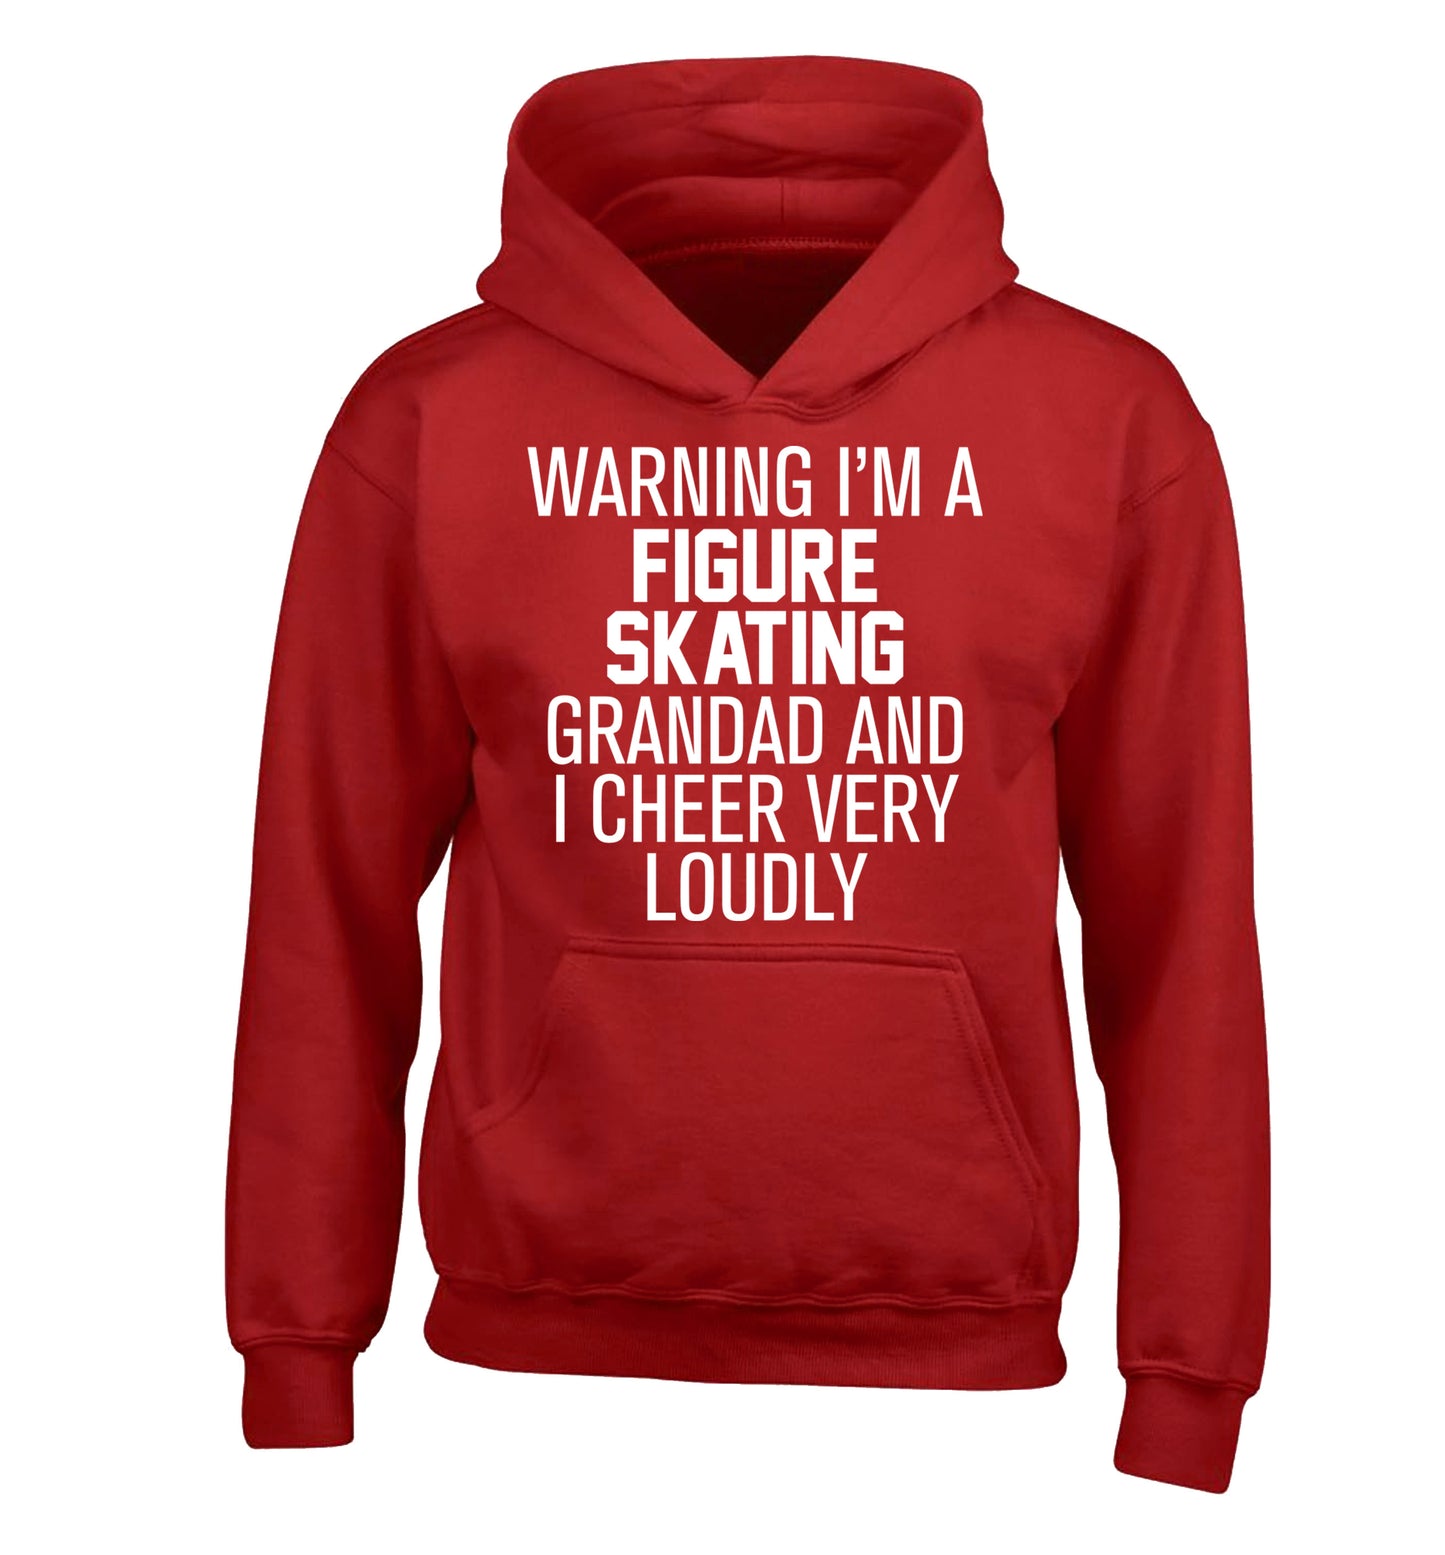 Warning I'm a figure skating grandad and I cheer very loudly children's red hoodie 12-14 Years